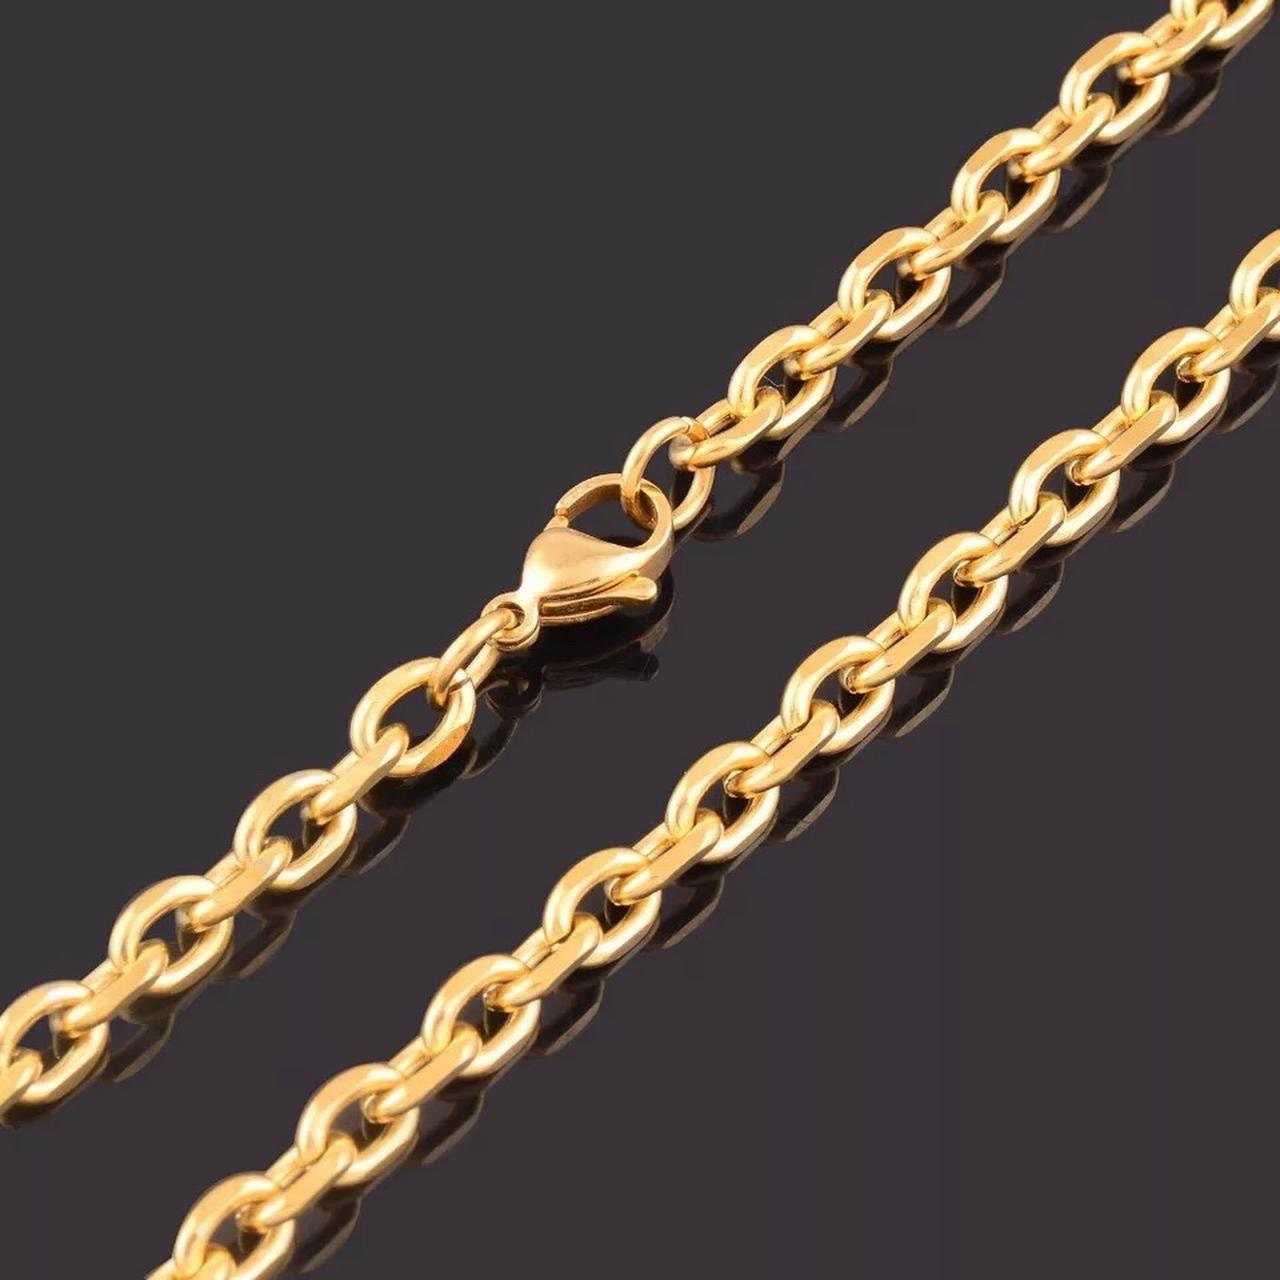 CRW Lock Necklace with 1.6mm rolo link chain in gold - Latch Necklace for Women - Keys Necklace for Men - Necklace with Hip Hop Pendant